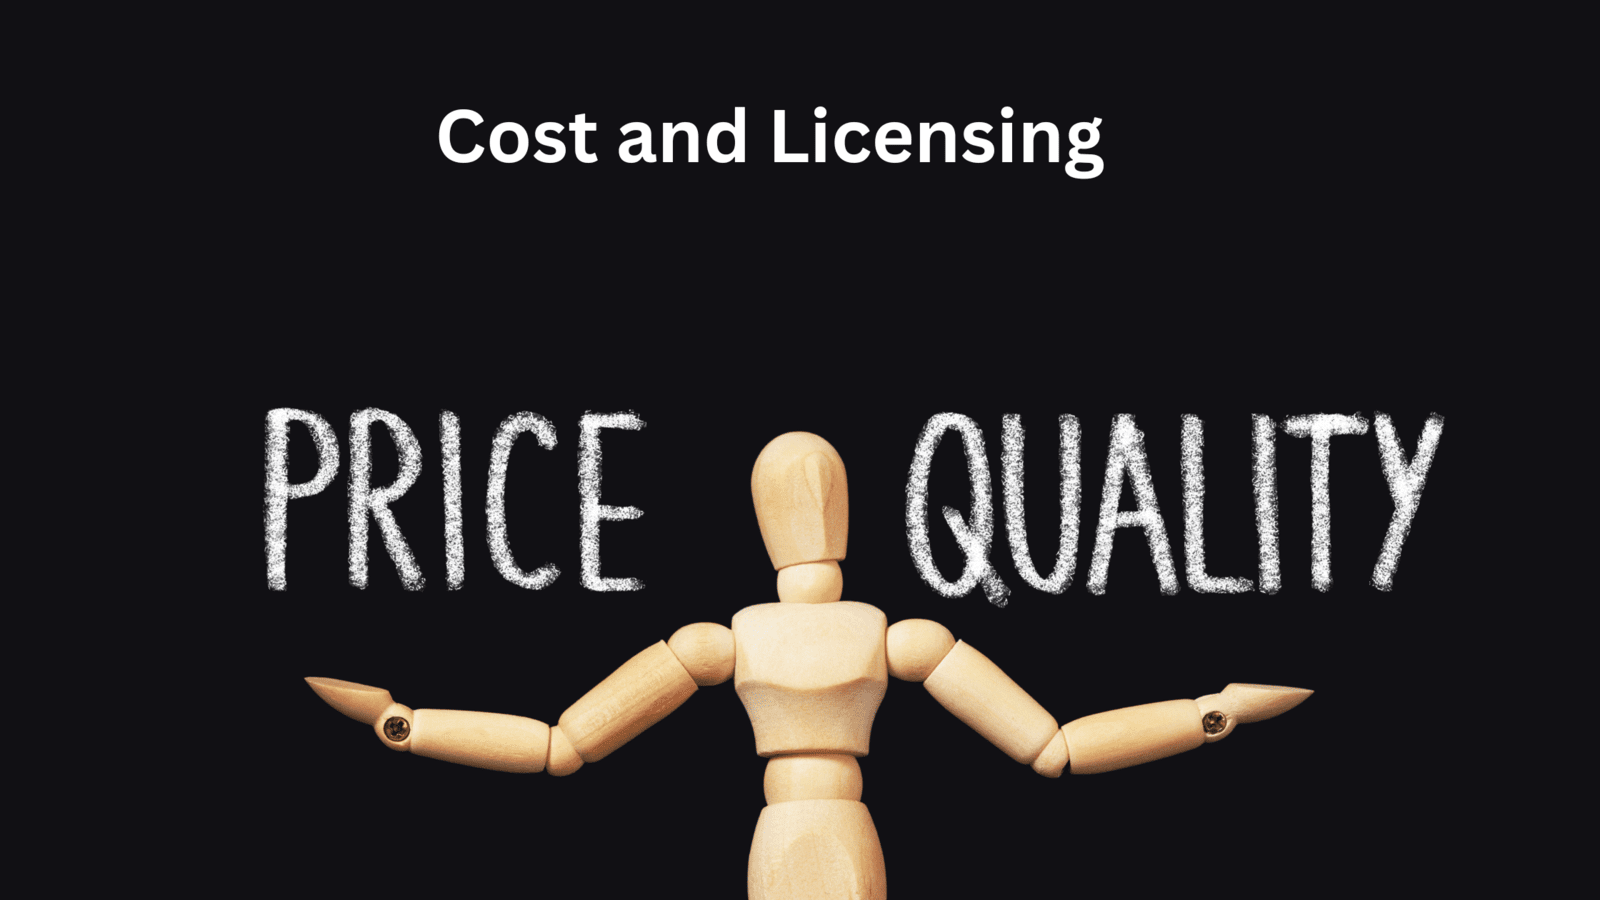 Cost and Licensing